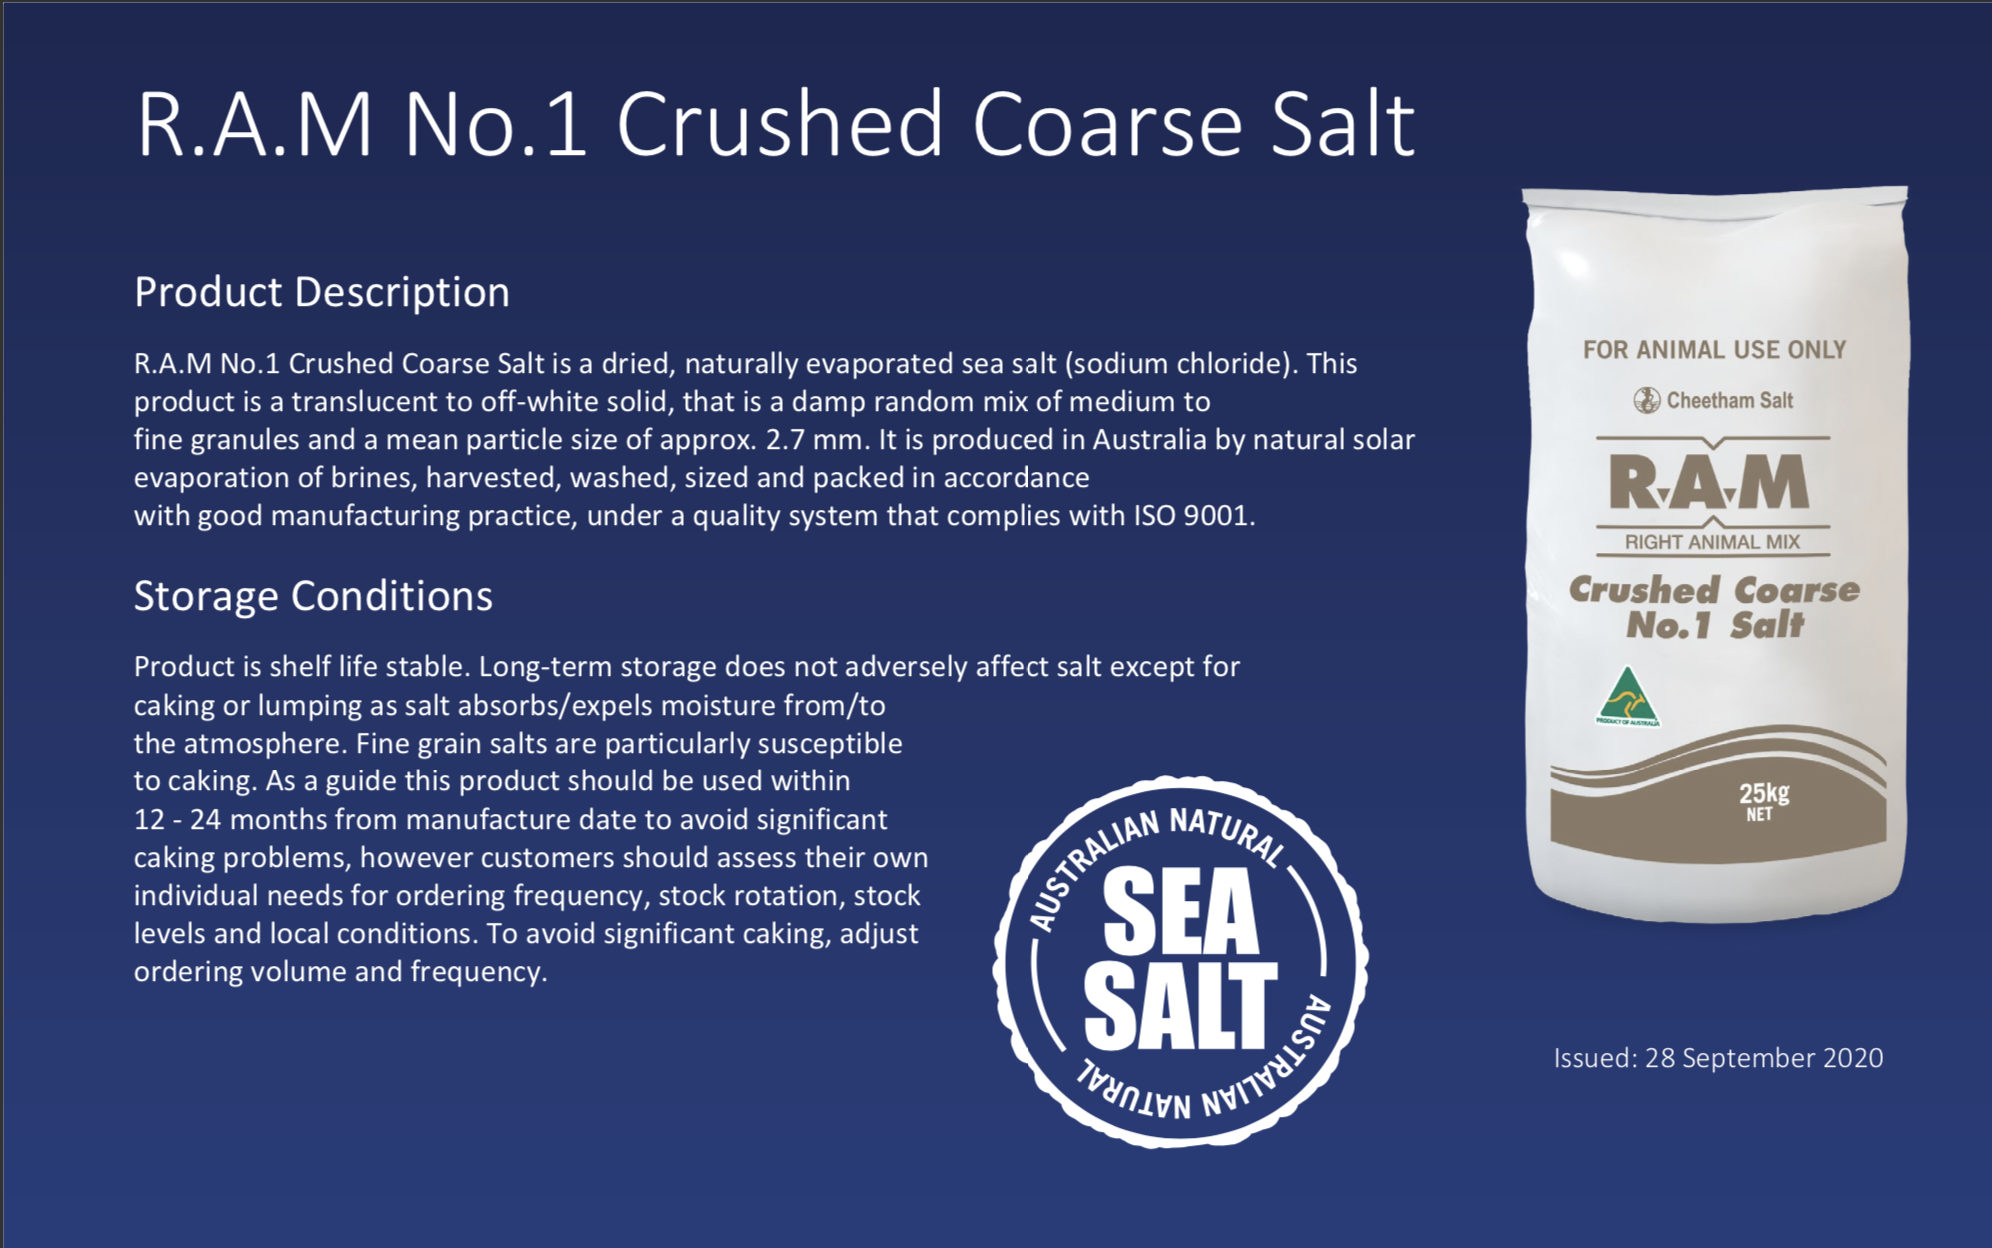 R.A.M. No.1 Crushed Coarse Salt product description. The product description includes details about storage and how to use in stockfeed.